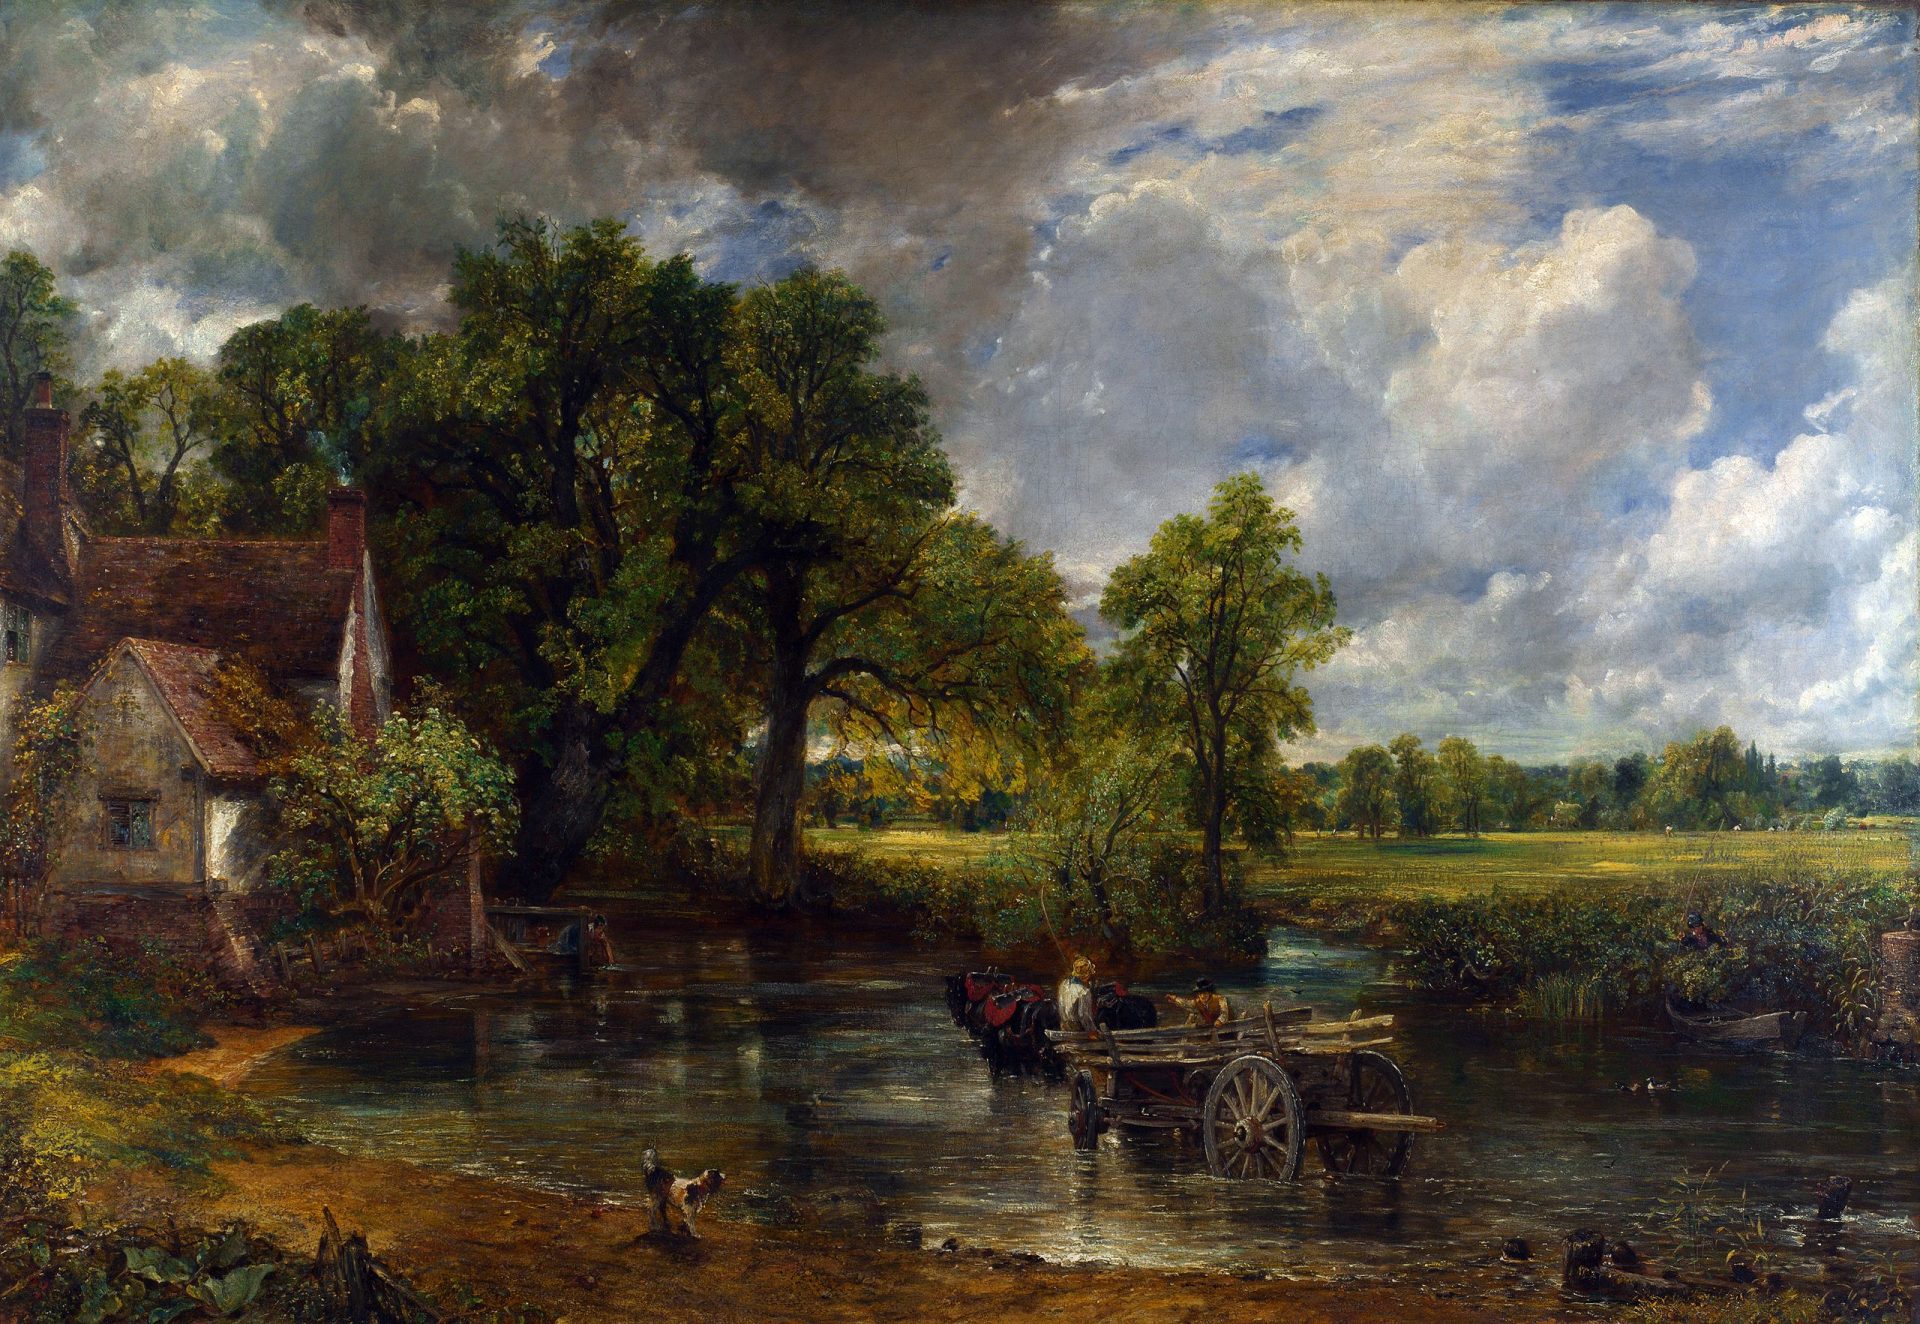 A painting depicting a scene from the English countryside, a horse drawn carriage is rolling through a shallow creek.